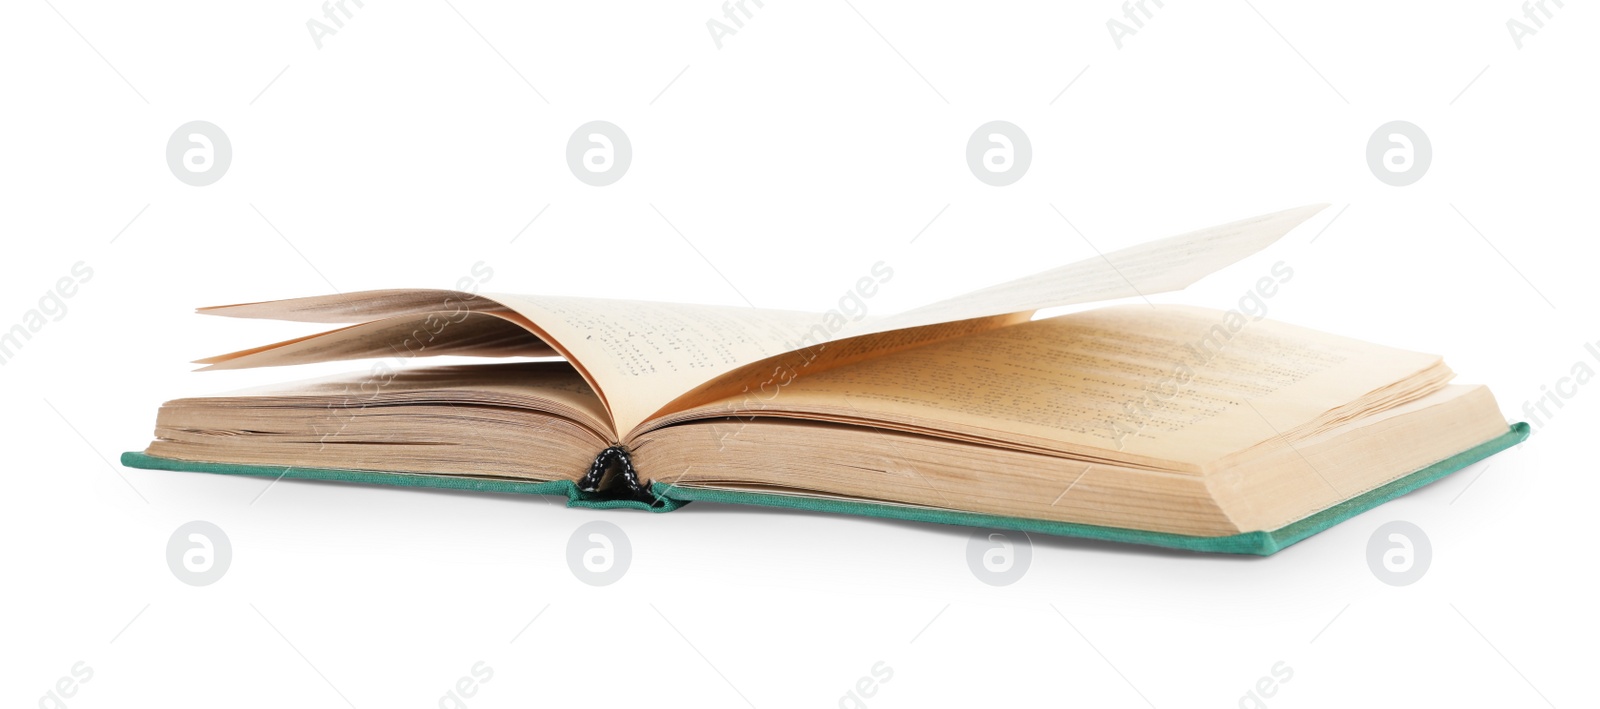 Photo of Old open hardcover book isolated on white